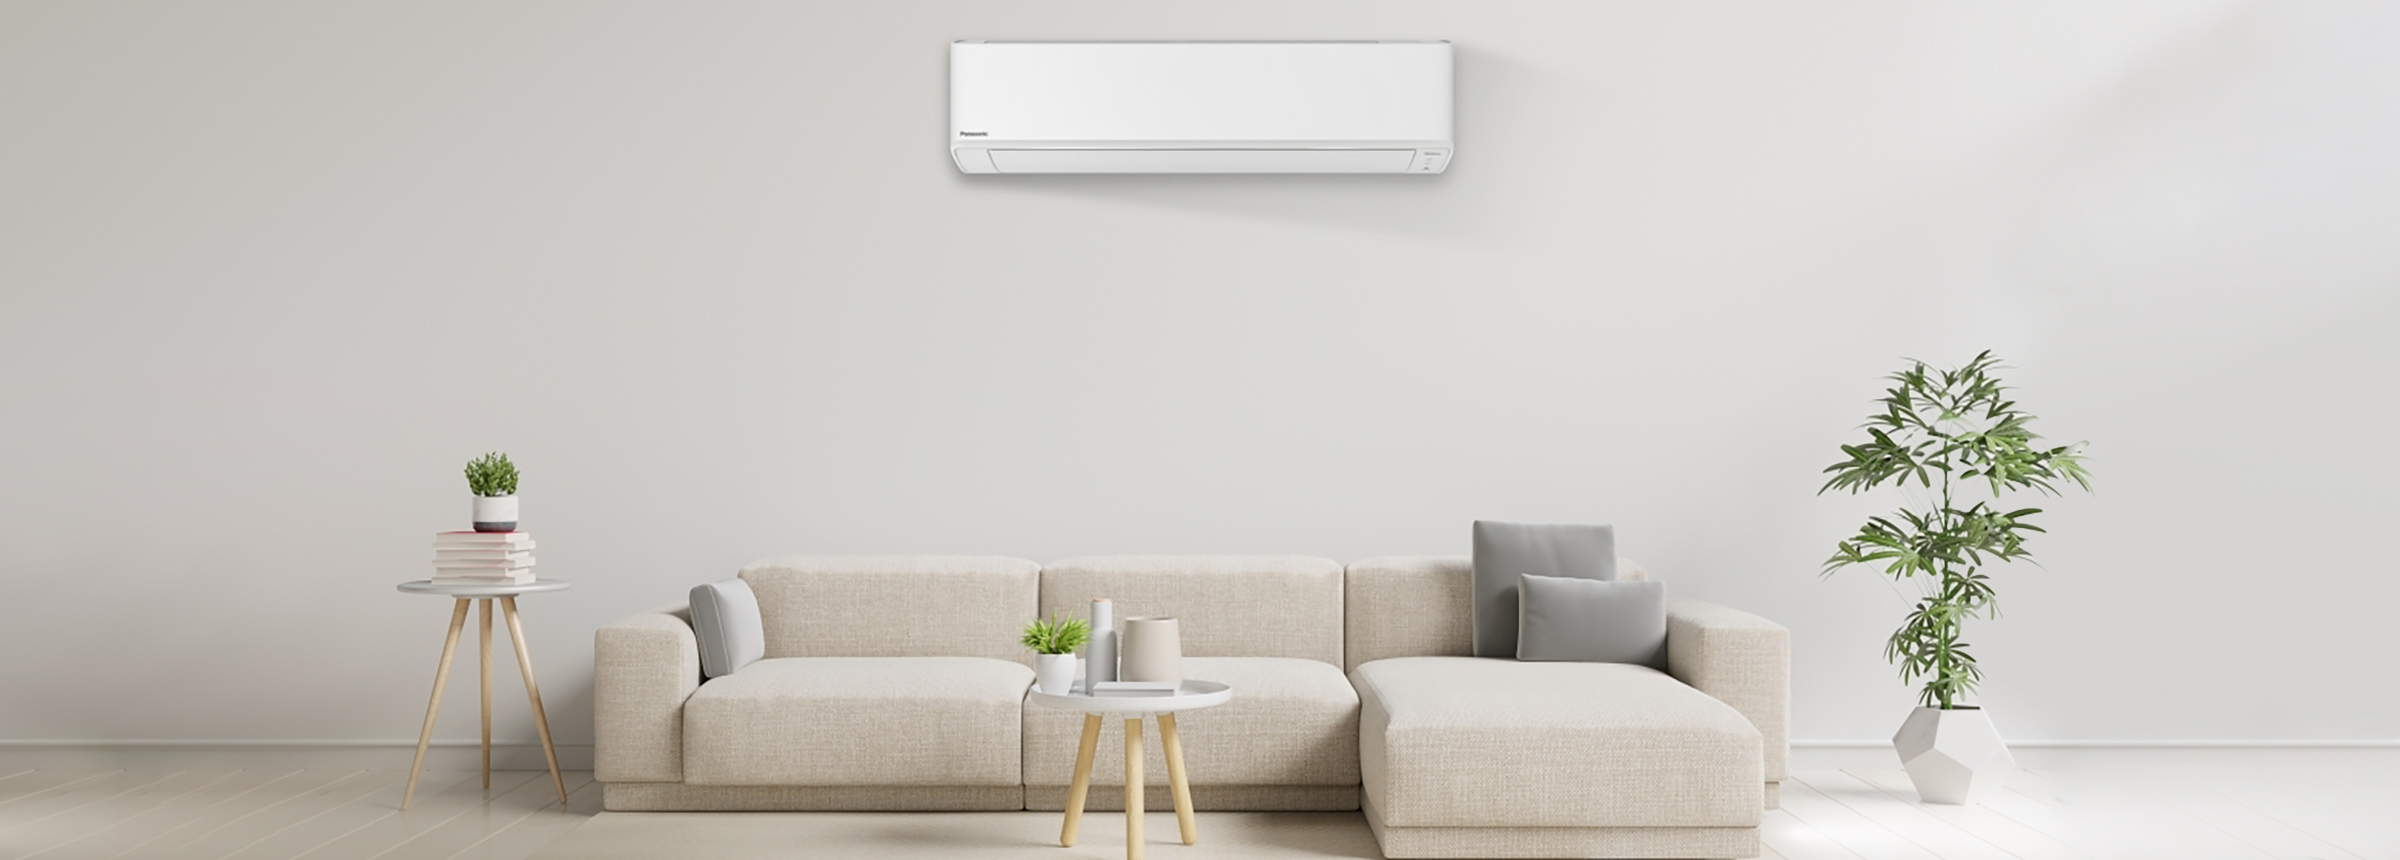 A photo of a beautiful large living room with an airconditioner on the wall